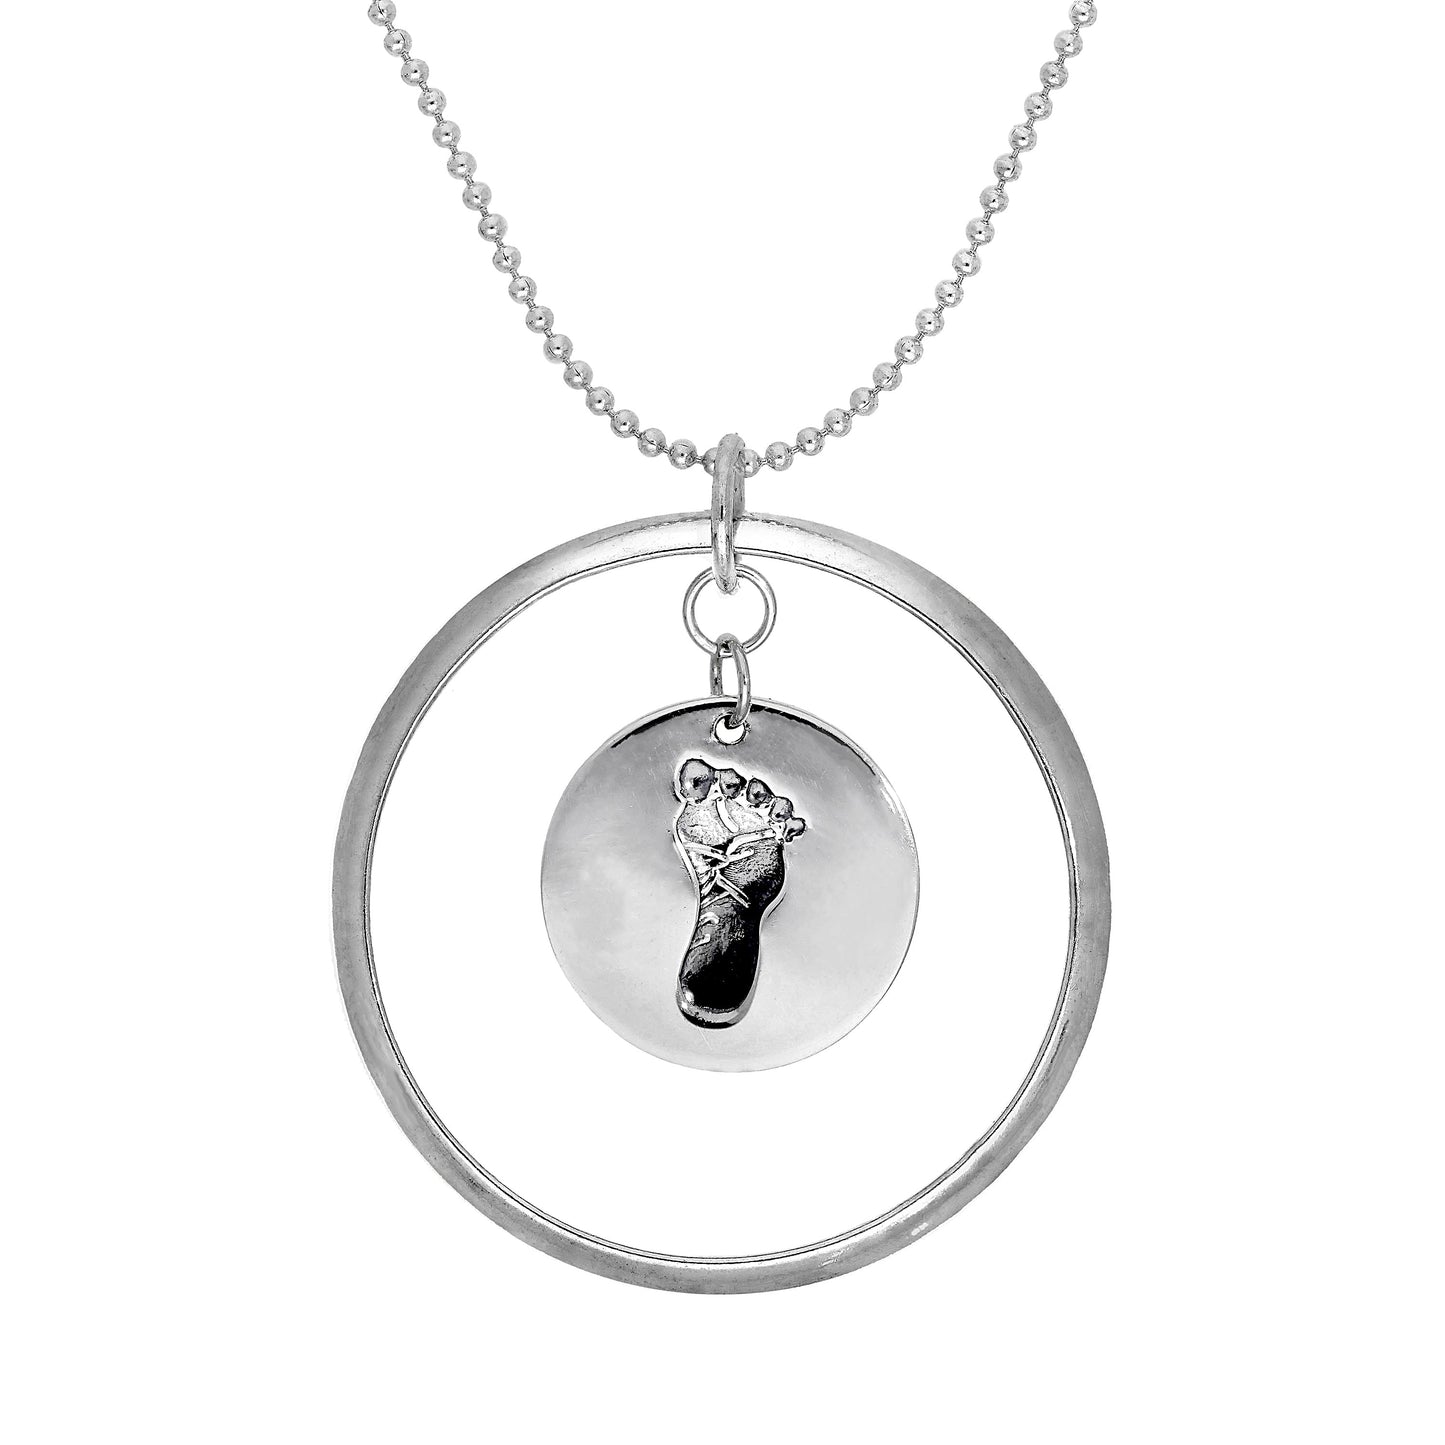 Sterling Silver Karma Moments Pendant with Baby Footprint Charm on Bead Chain Necklace